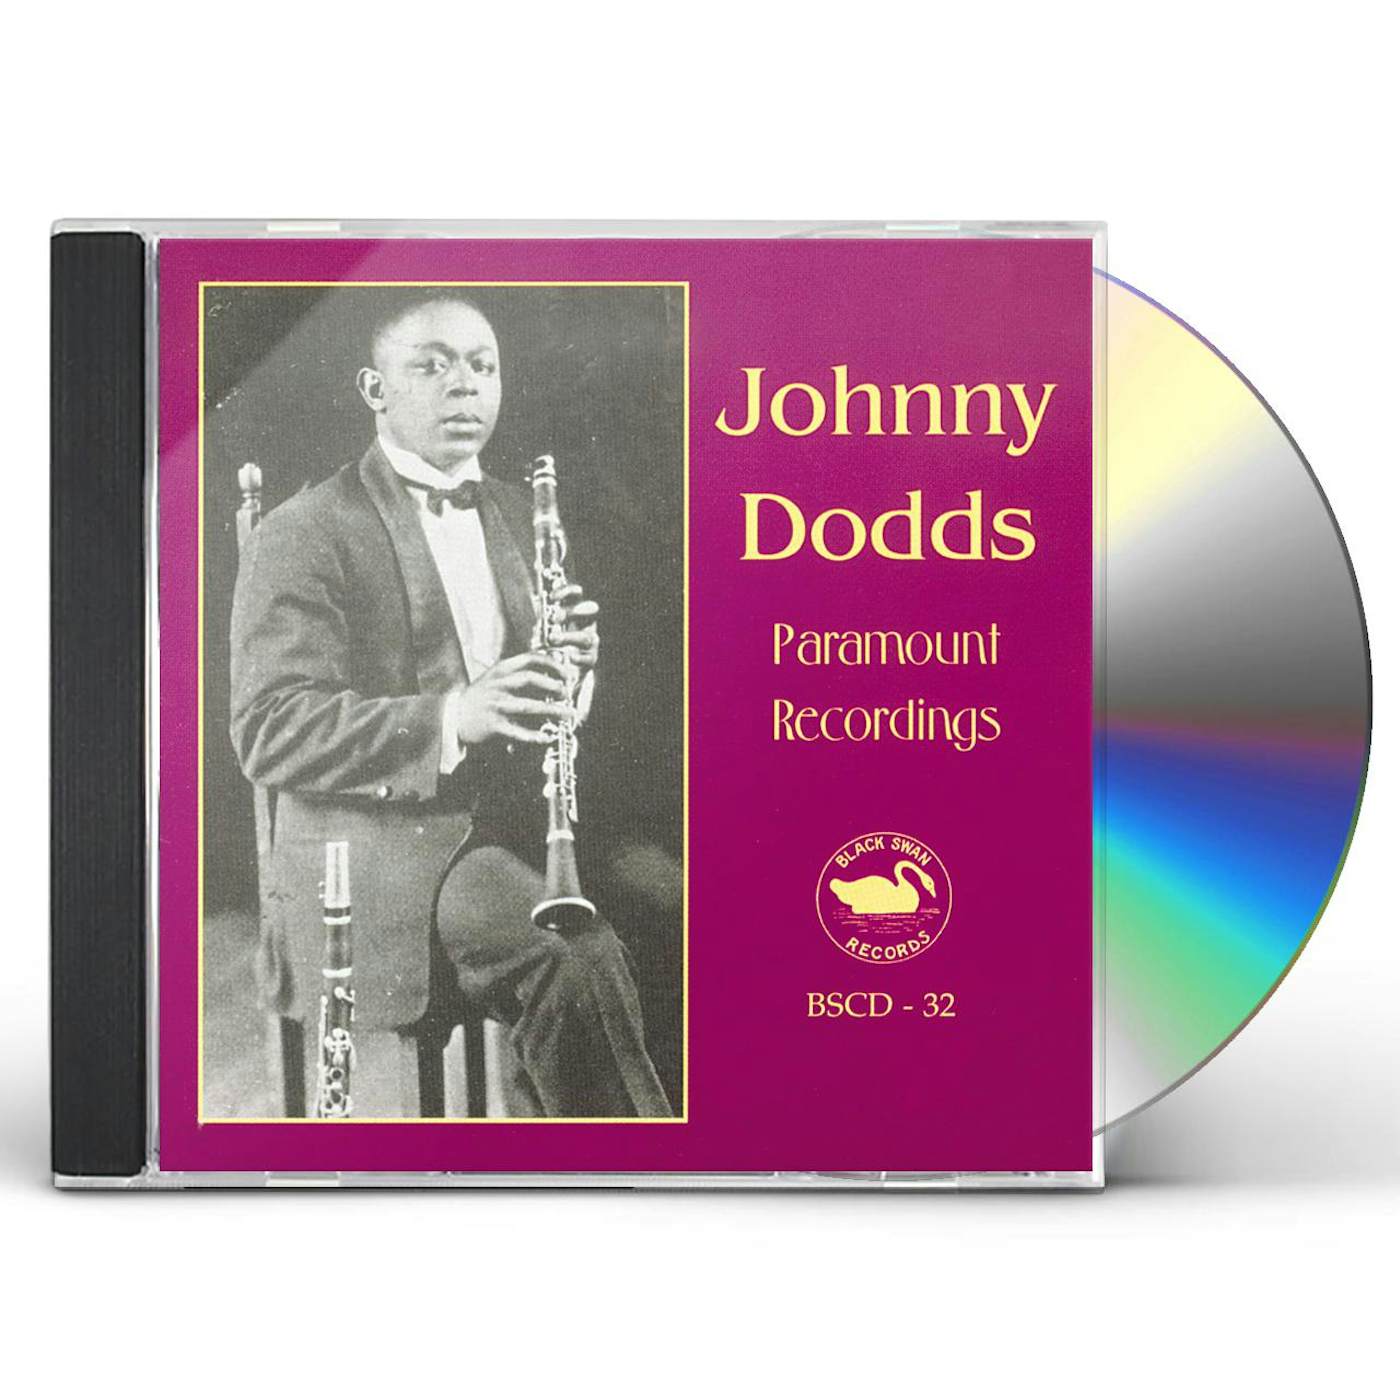 Johnny Dodds COMPLETE PARAMOUNT RECORDINGS 1 CD